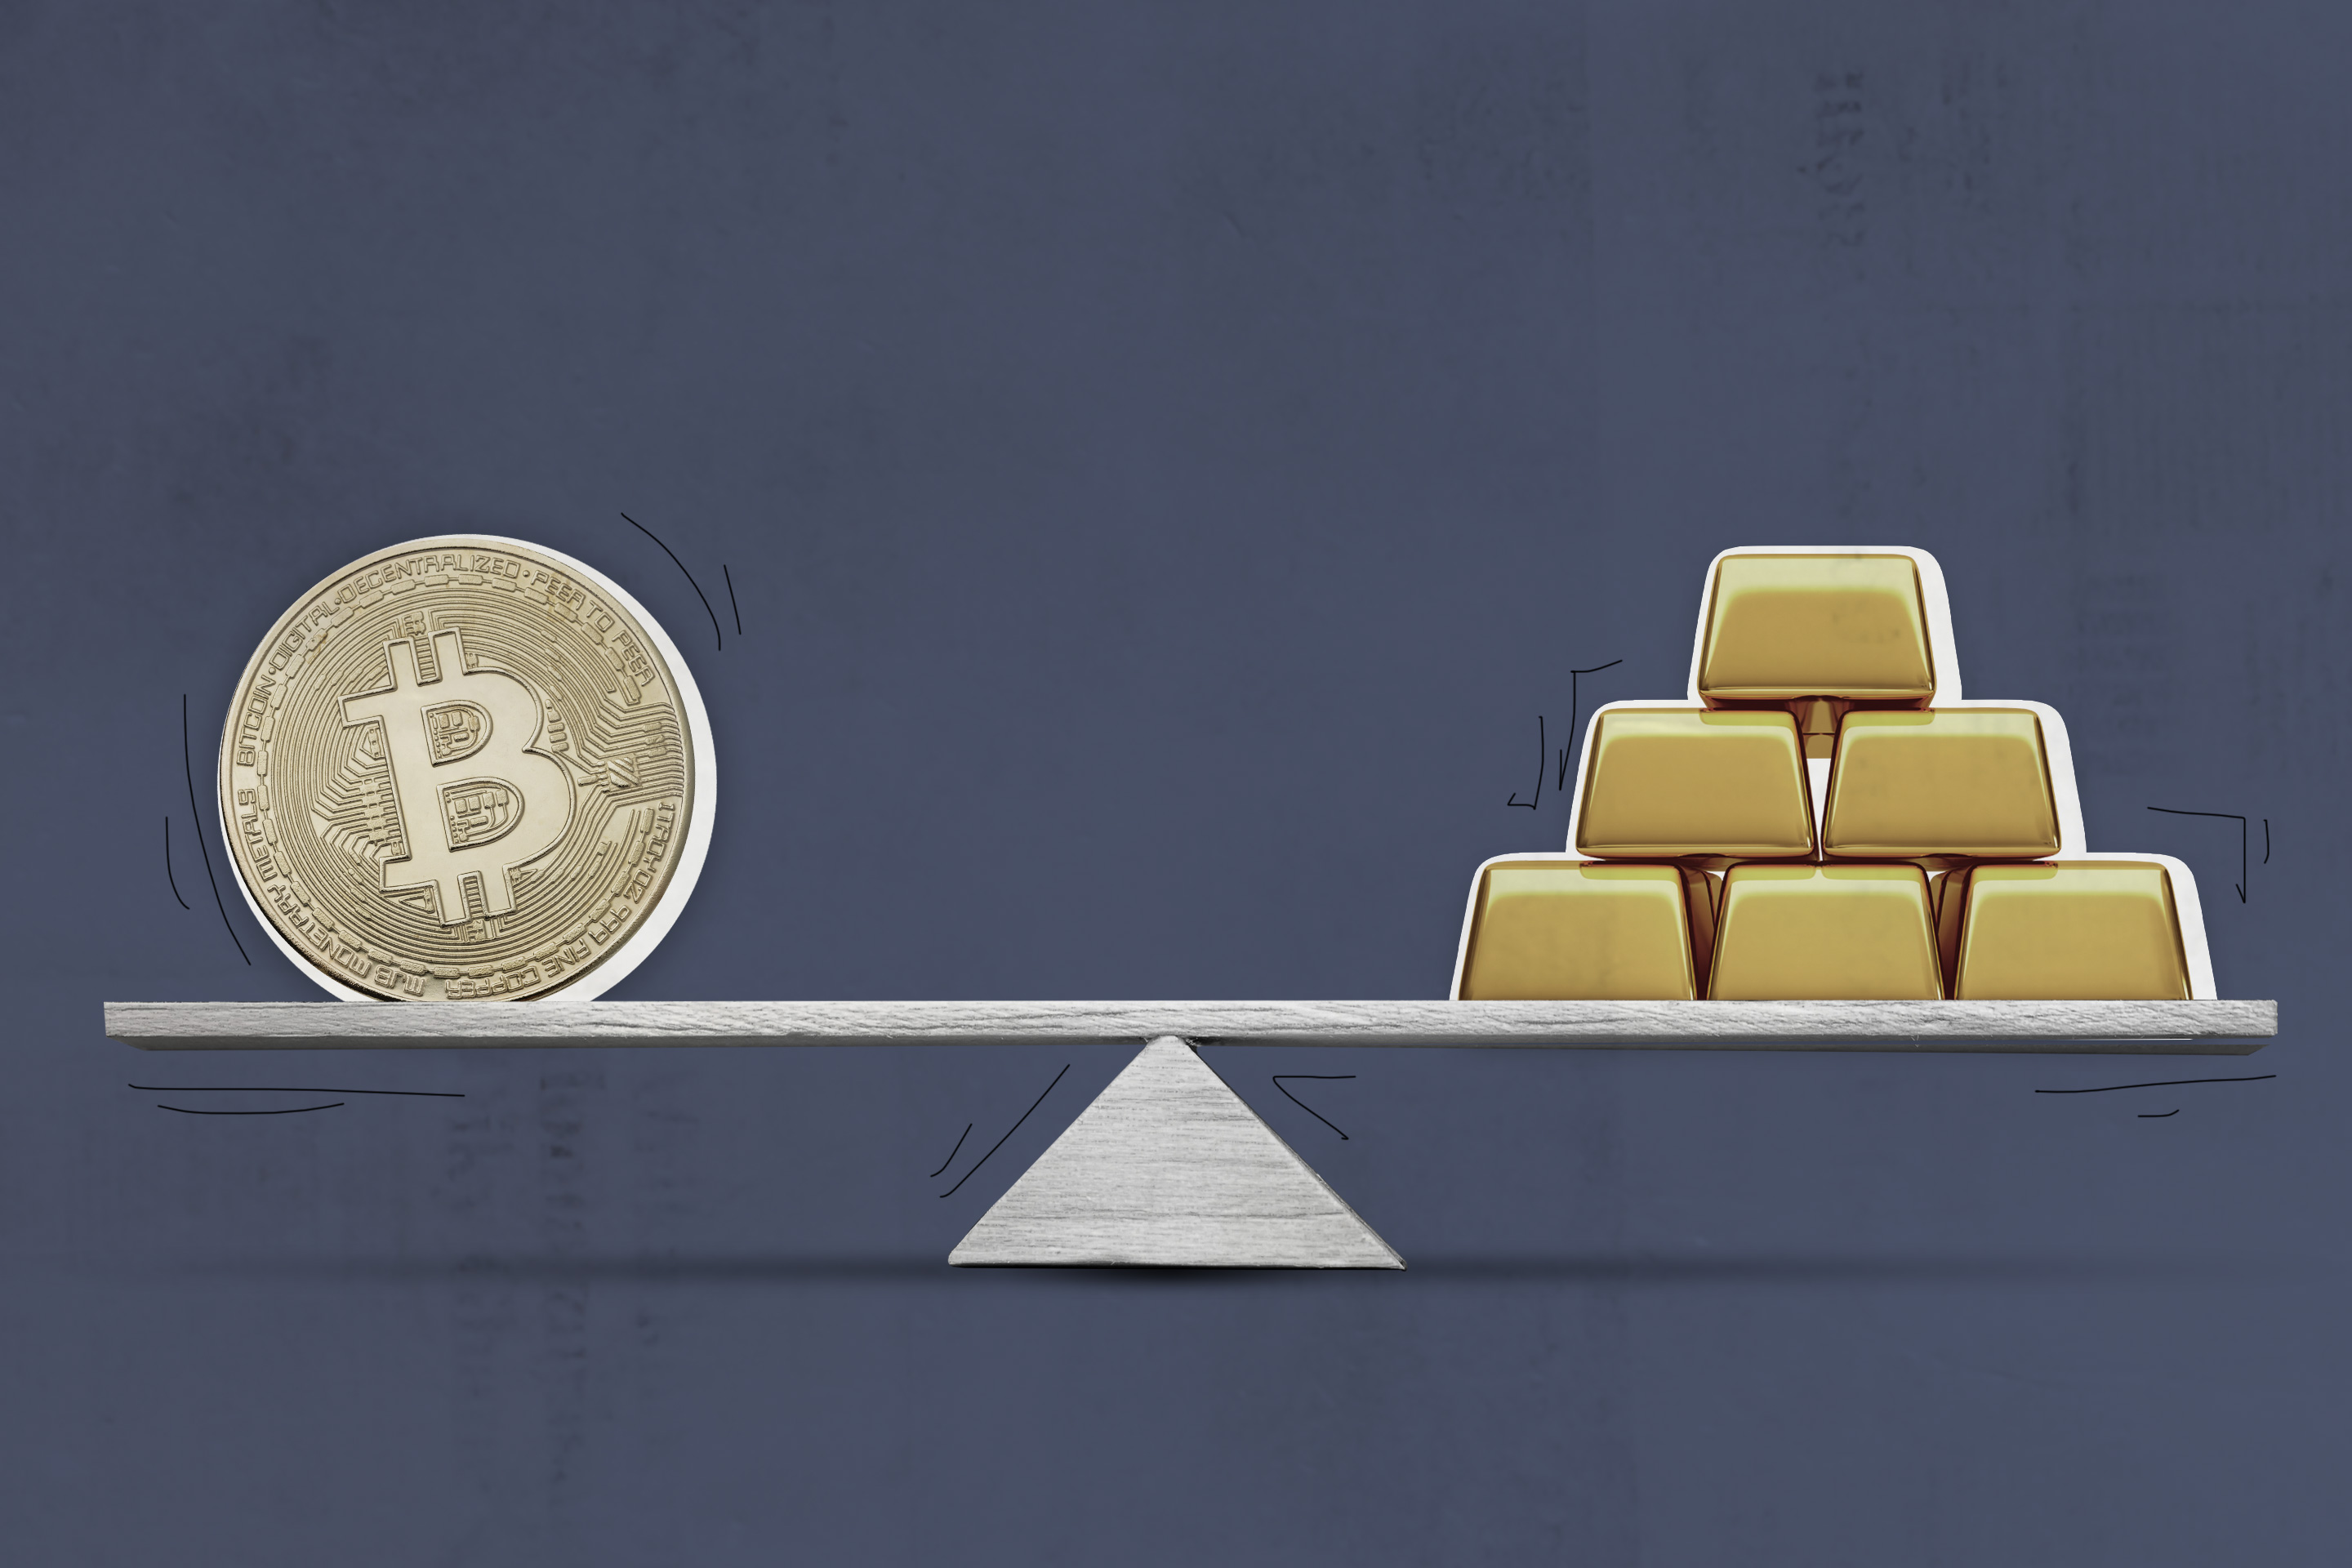 Why Crypto Fans Claim Bitcoin Is the New Gold